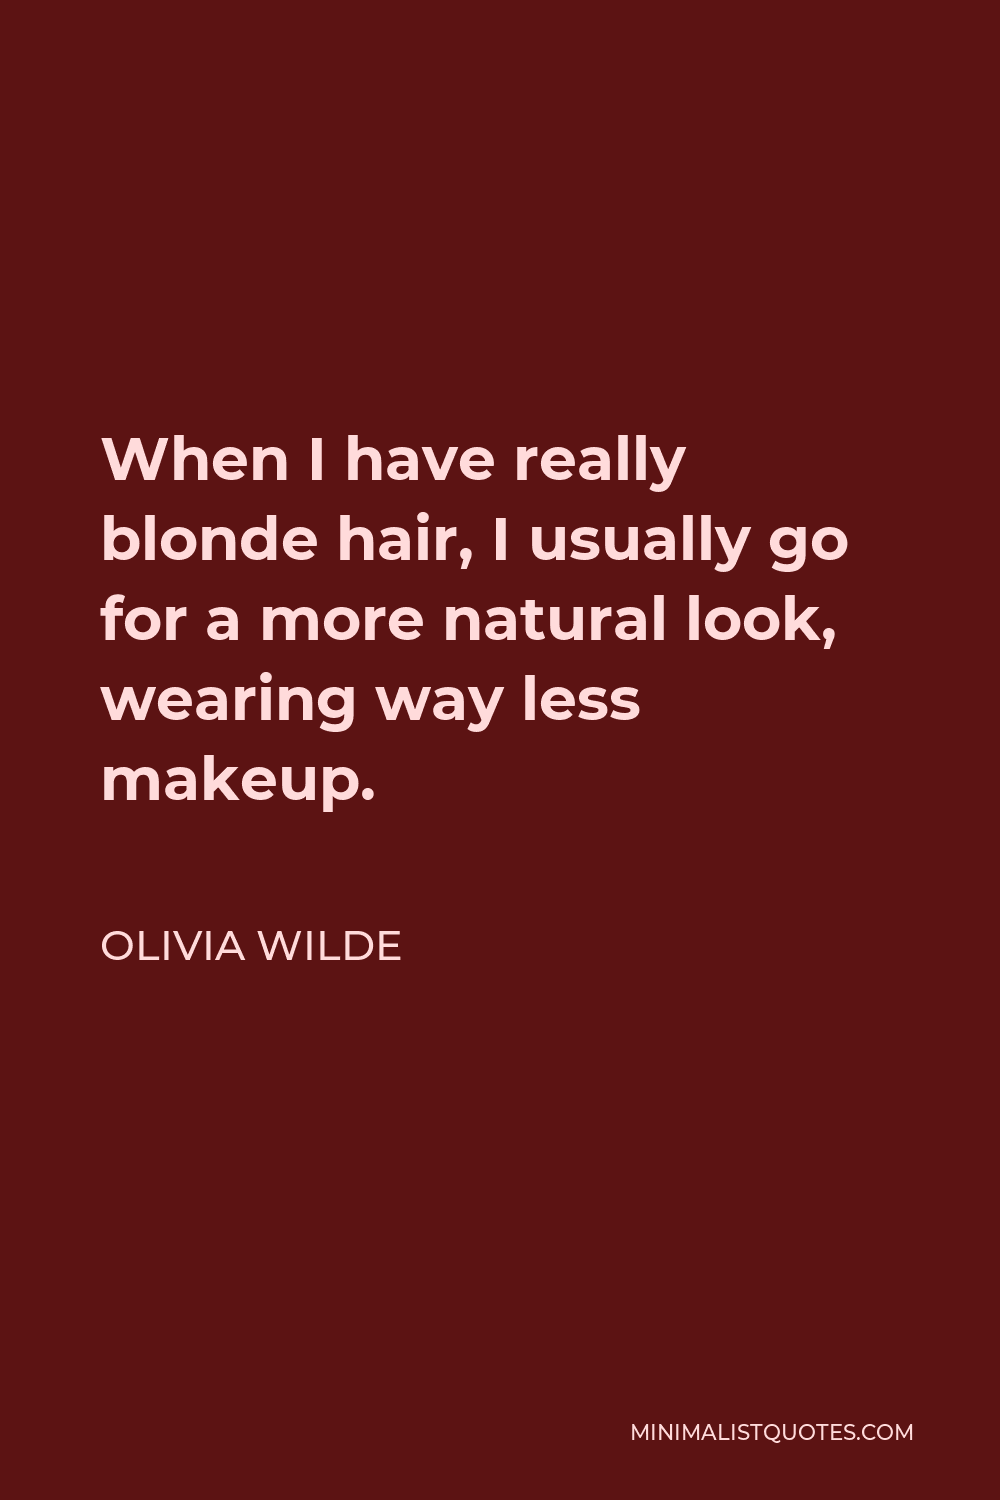 Olivia Wilde Quote - When I have really blonde hair, I usually go for a more natural look, wearing way less makeup.